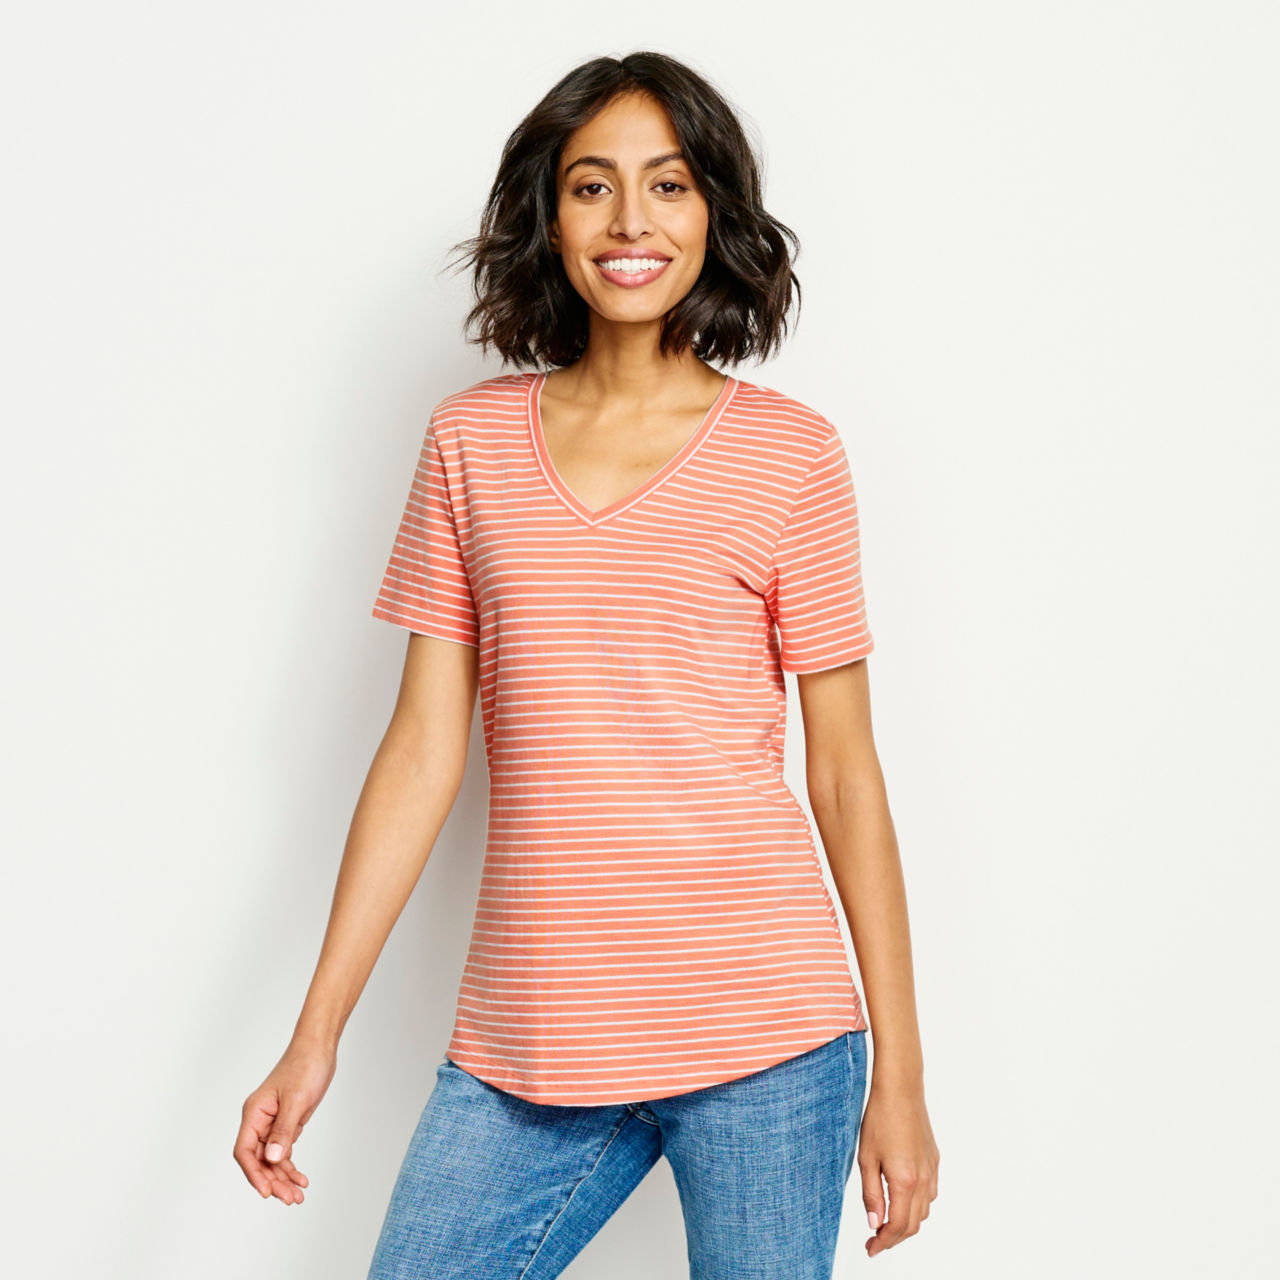 Perfect Relaxed V-Neck Short-Sleeved Tee - BLUE MOON MINI STRIPE image number 1